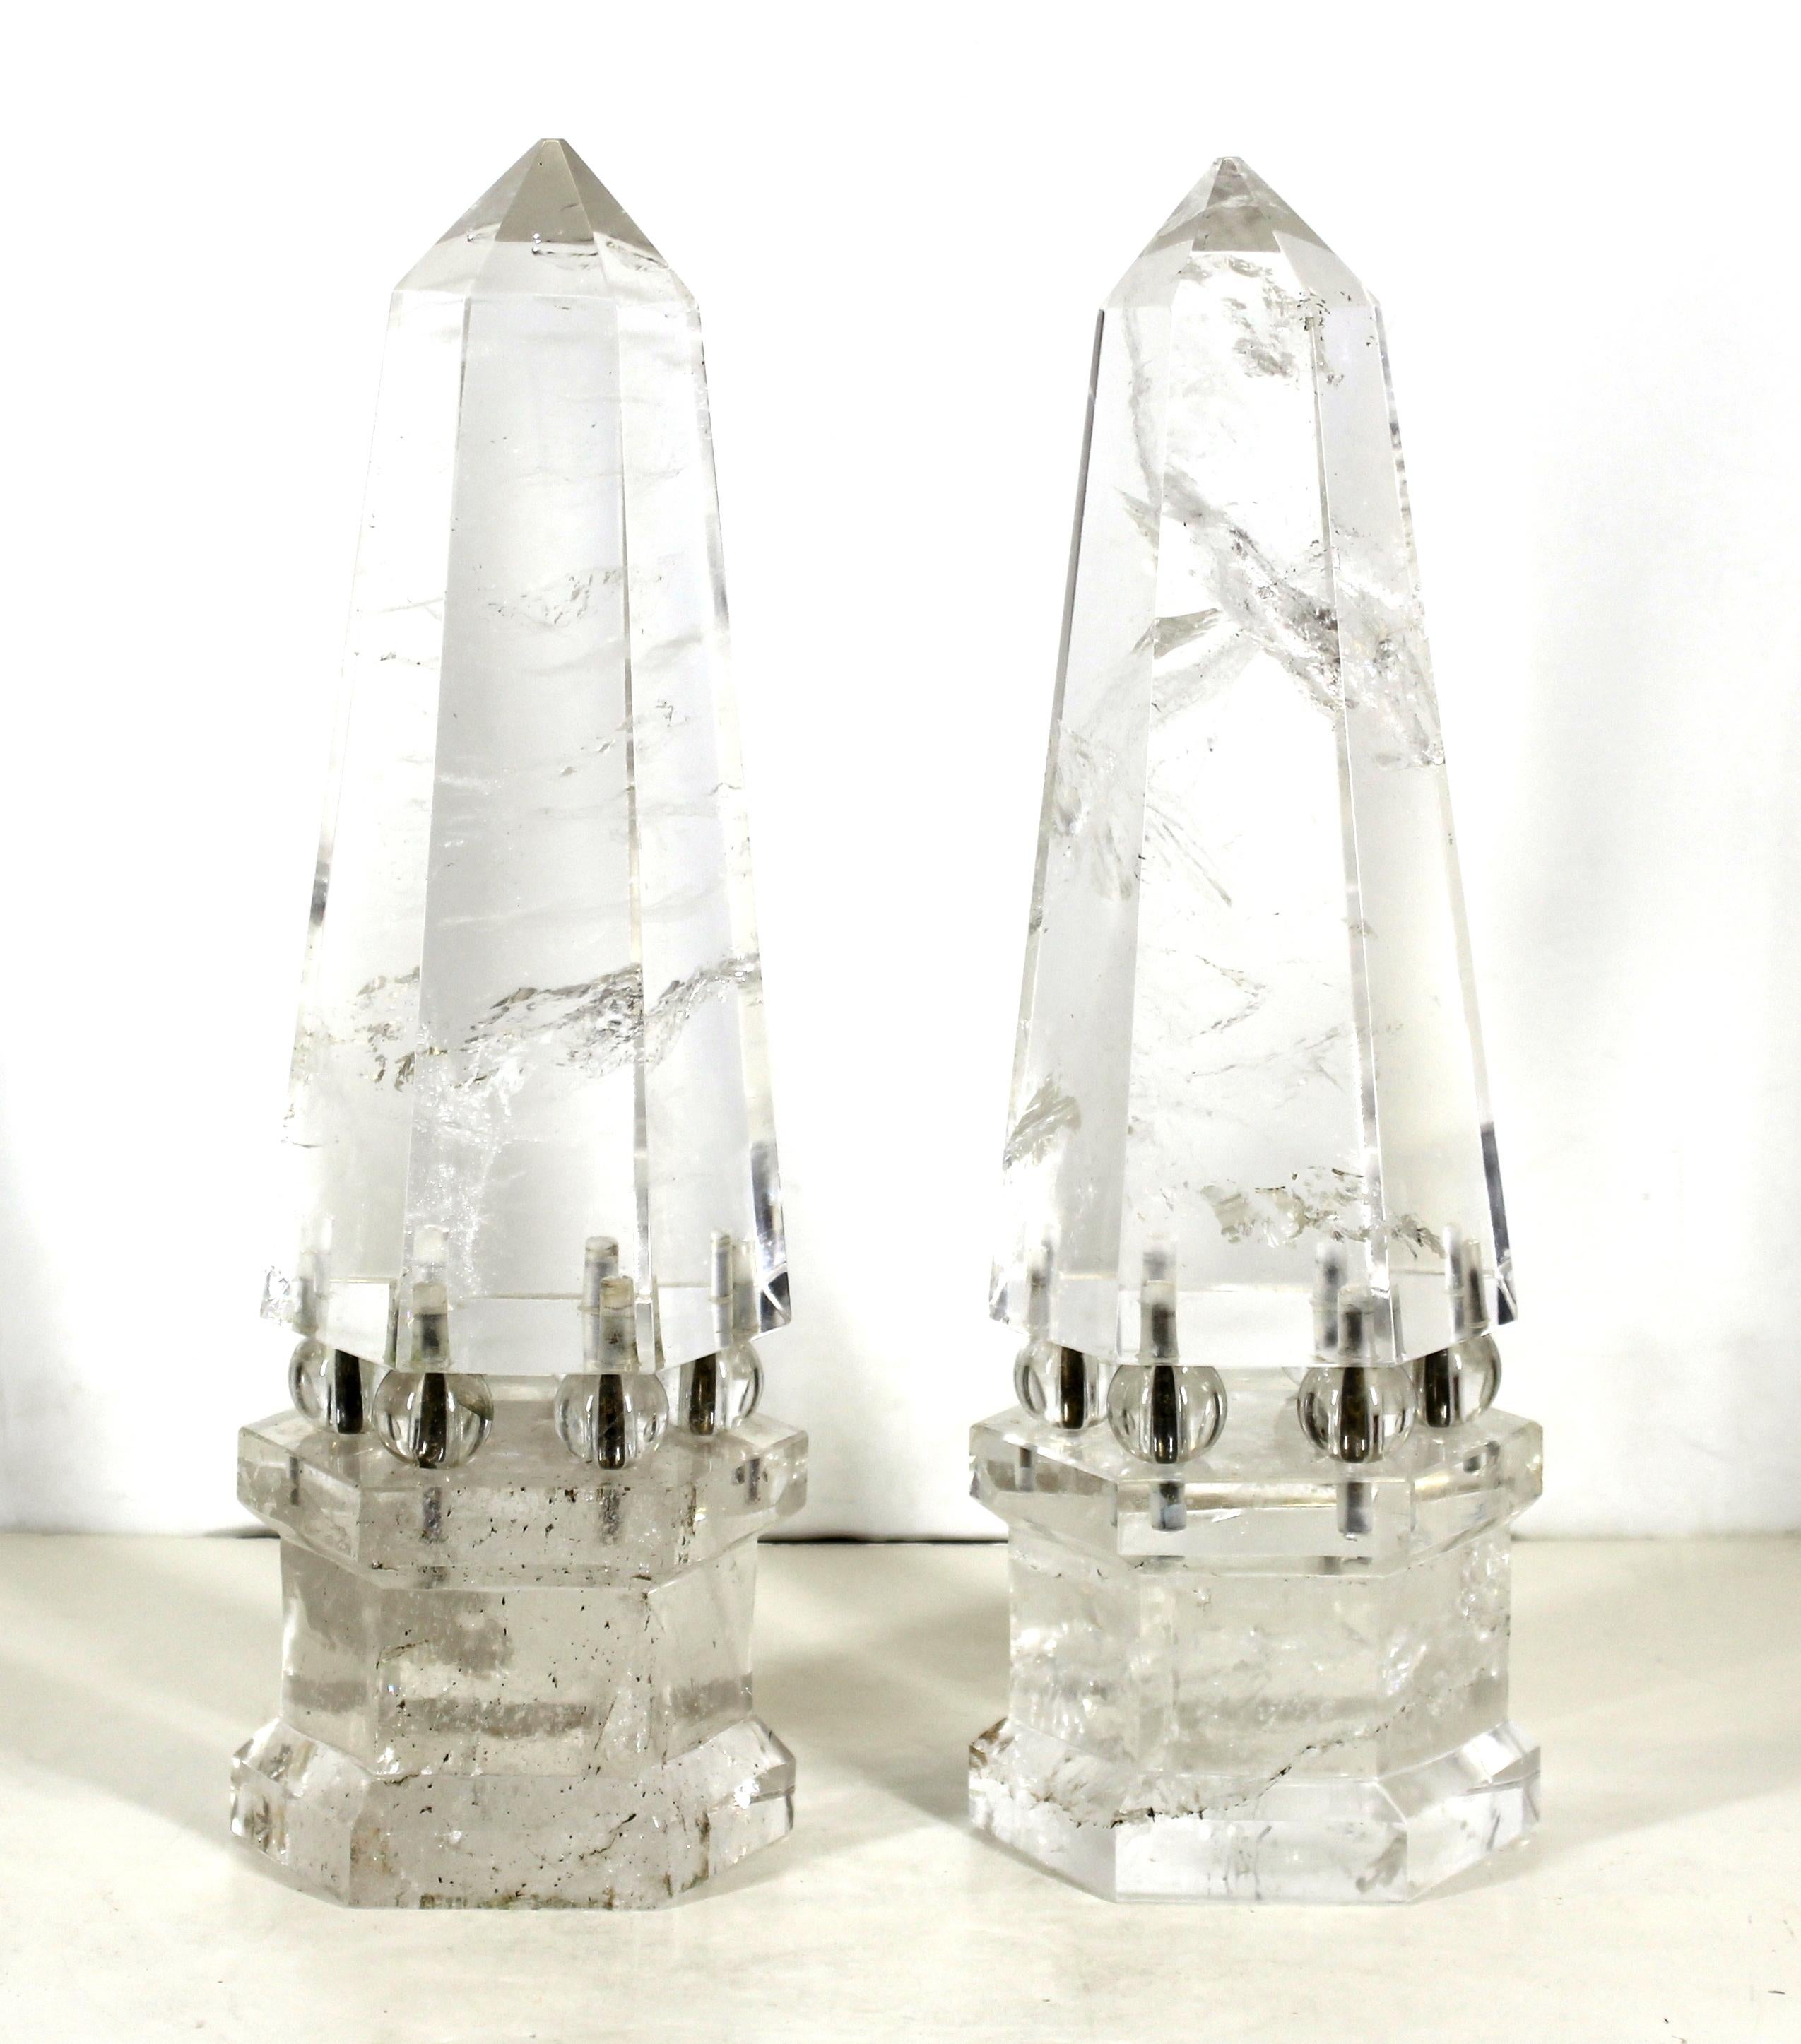 Continental neoclassical pair of rock crystal obelisks in hexagonal shape, each mounted on six bronze rods holding rock crystal balls and connecting to the hexagonal rock crystal base. Made in Europe during the early 20th century, the pair is in